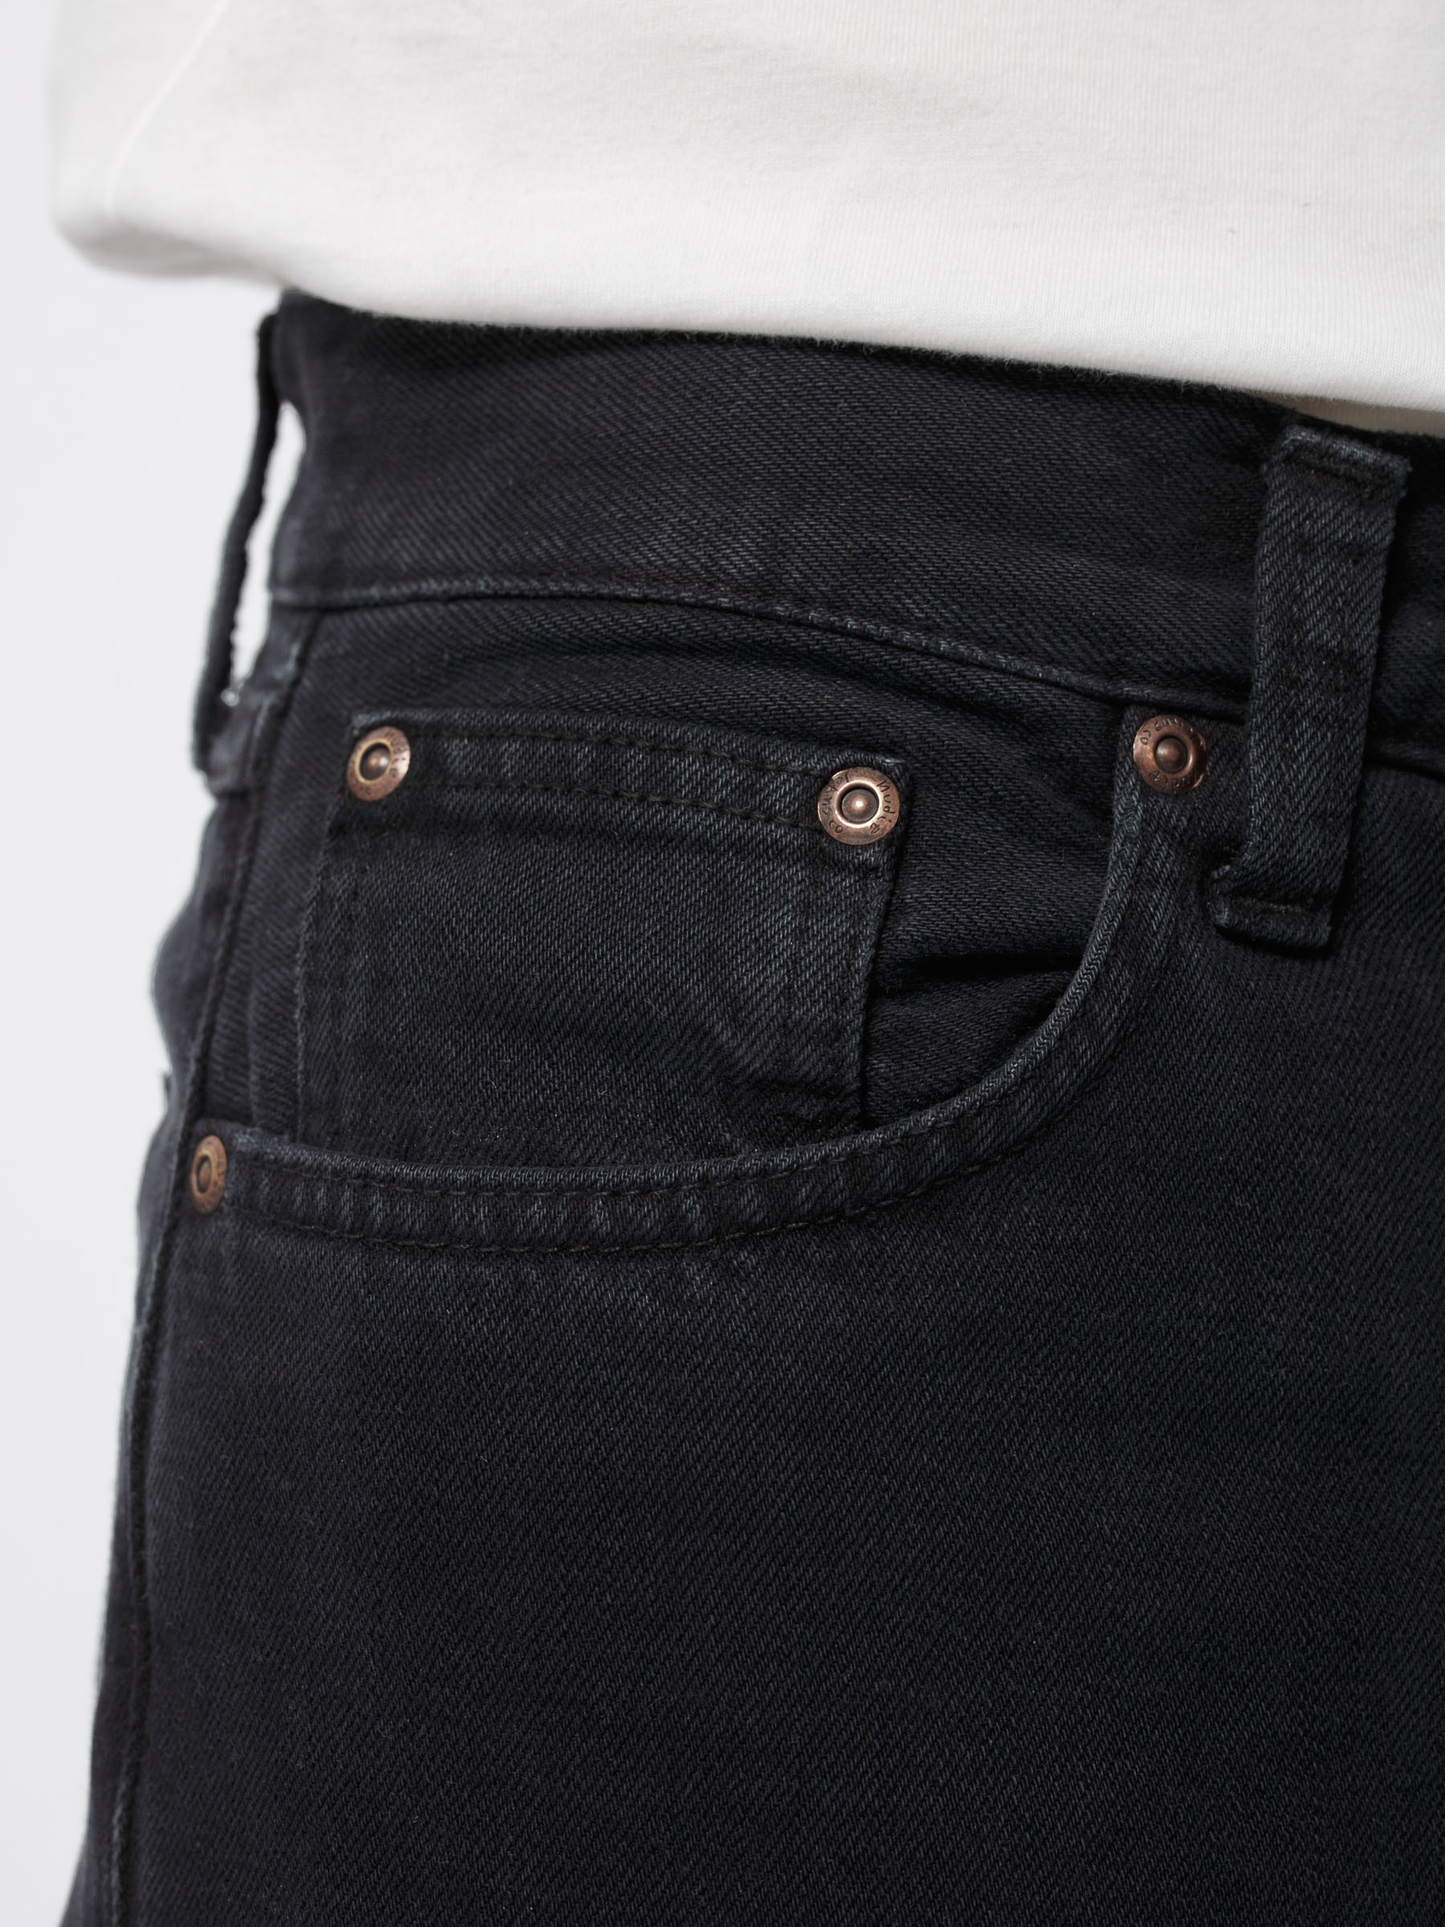 Nudie Jeans Gritty Jackson Jean L34 Black Forest